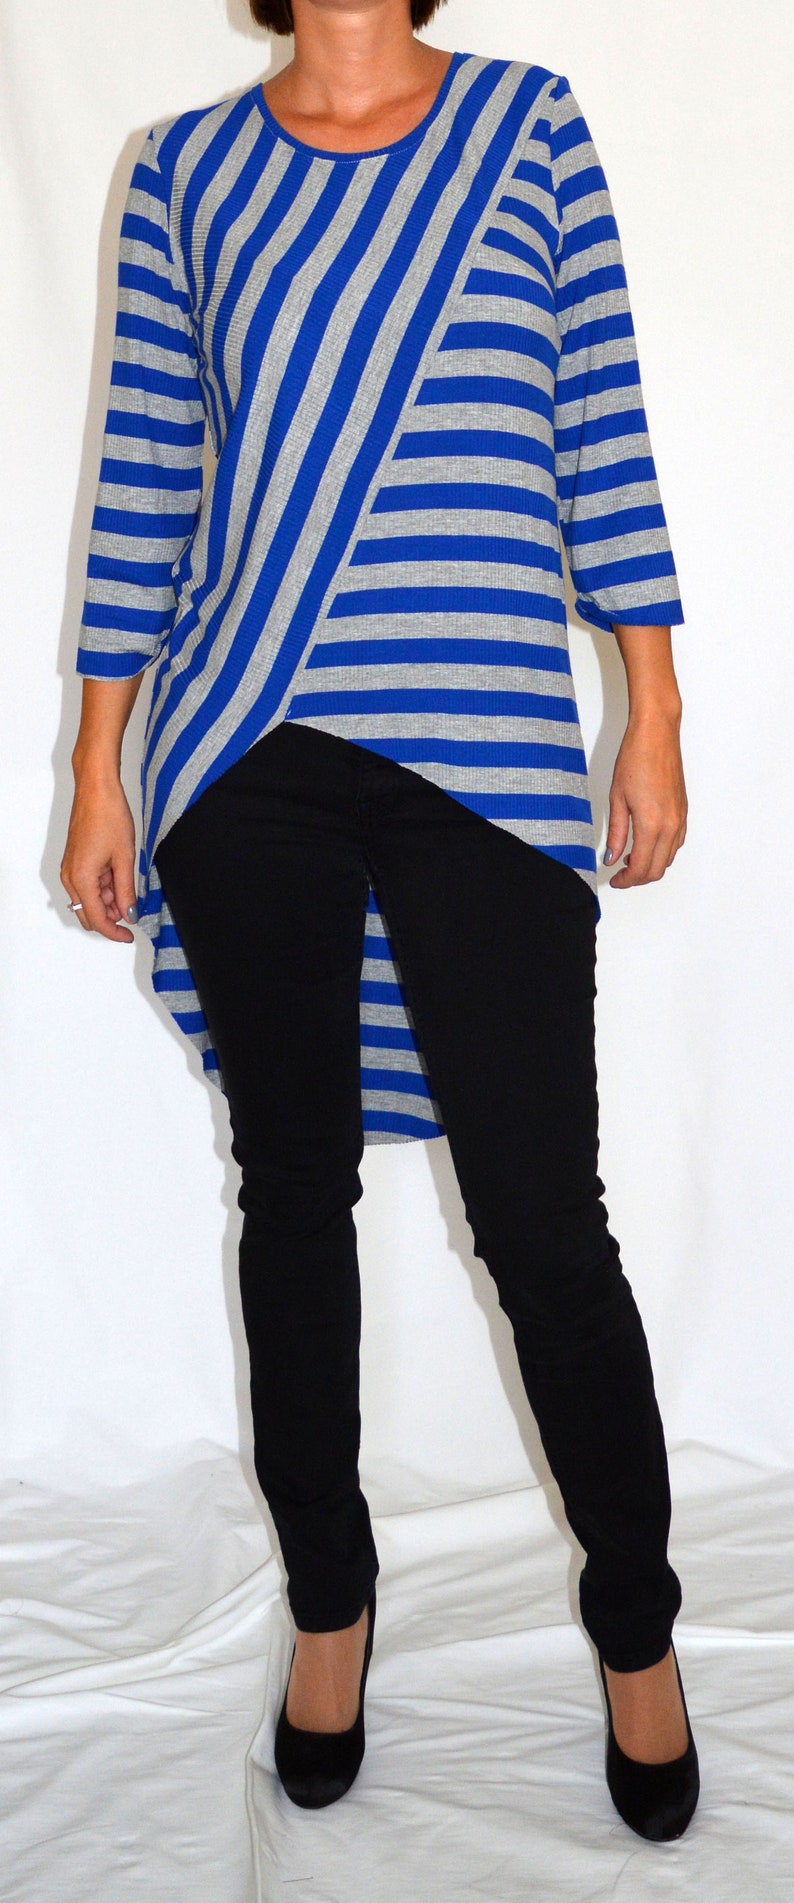 Grey, blue, striped, jersey, tunic, top, comfortable top Size UK 14, 16 / US 8, 10, 12 image 2